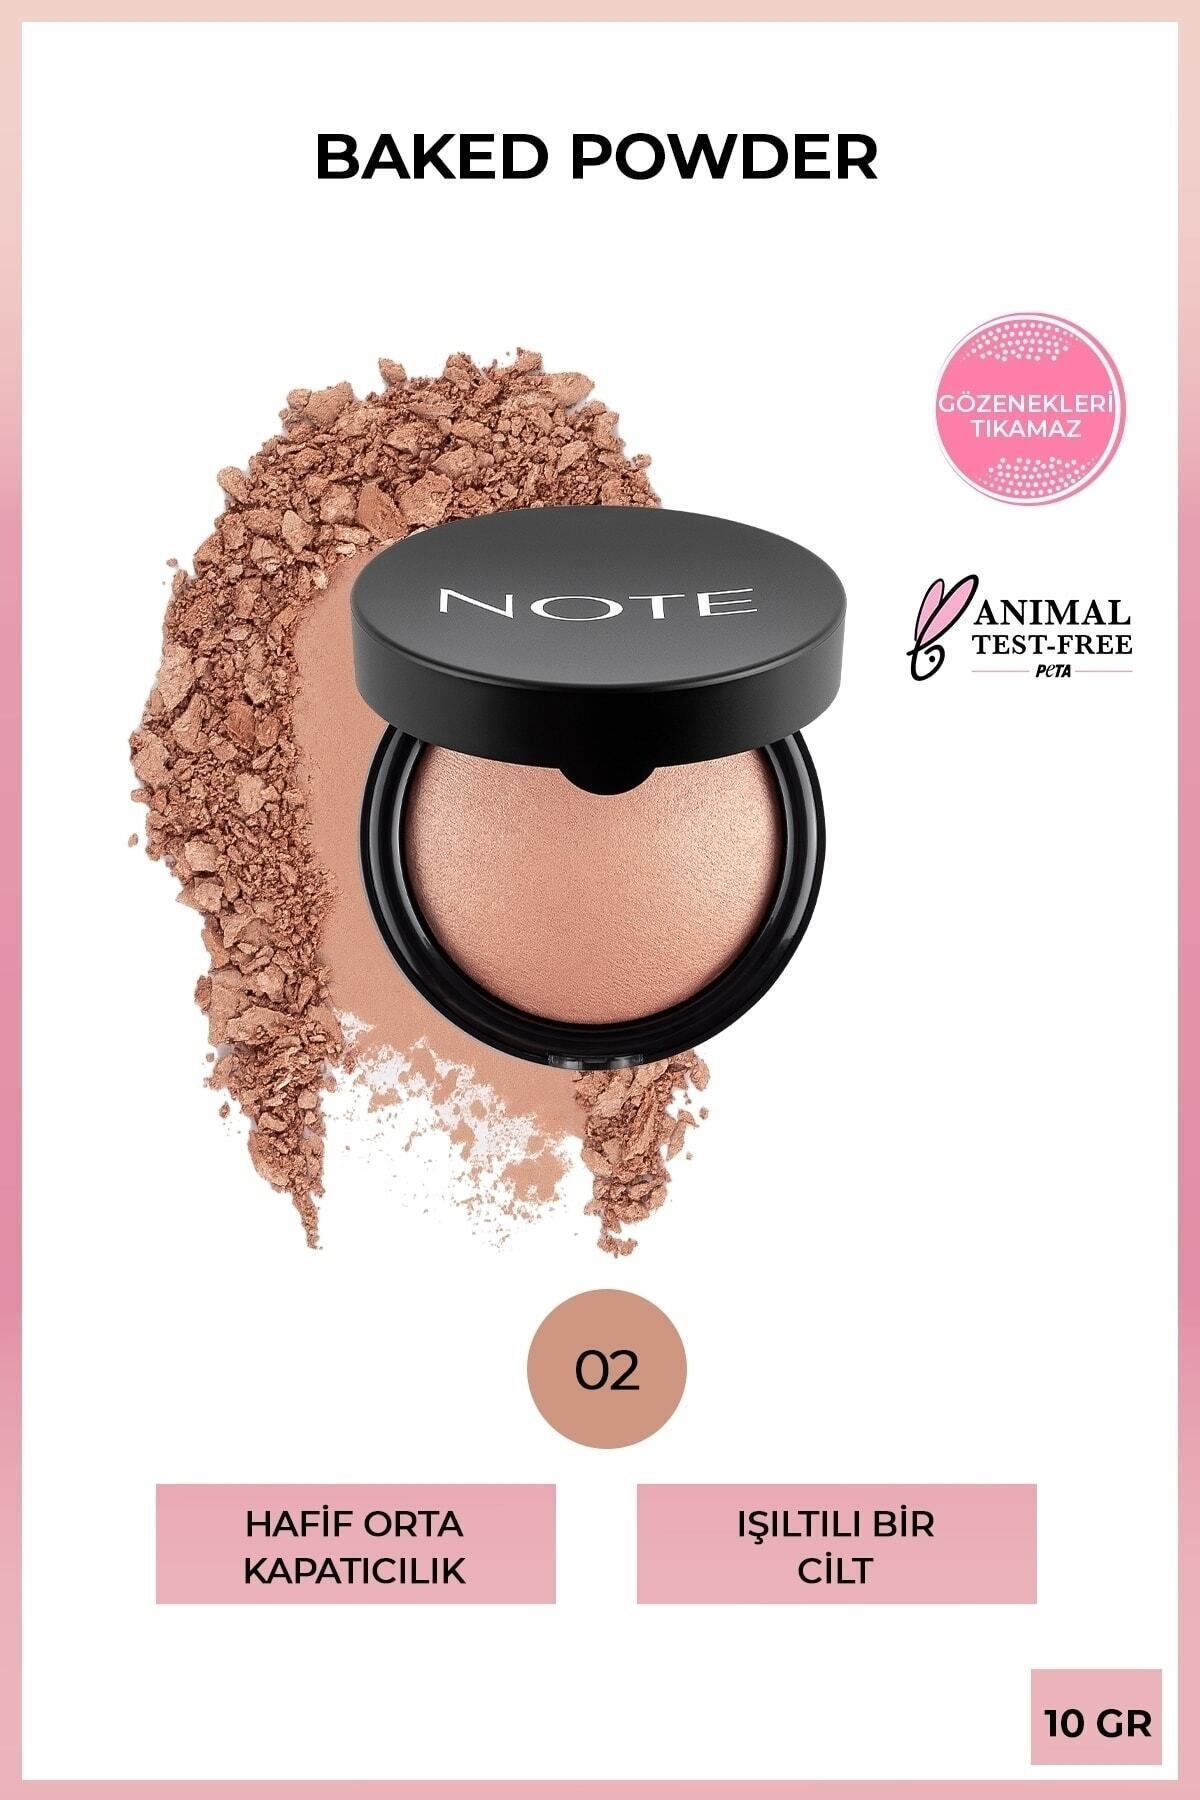 Note Cosmetics 02 HONEY WARM - BAKED POWDER POWDER FACE POWDER THAT FİLLS THE LİNES DKHAİR504